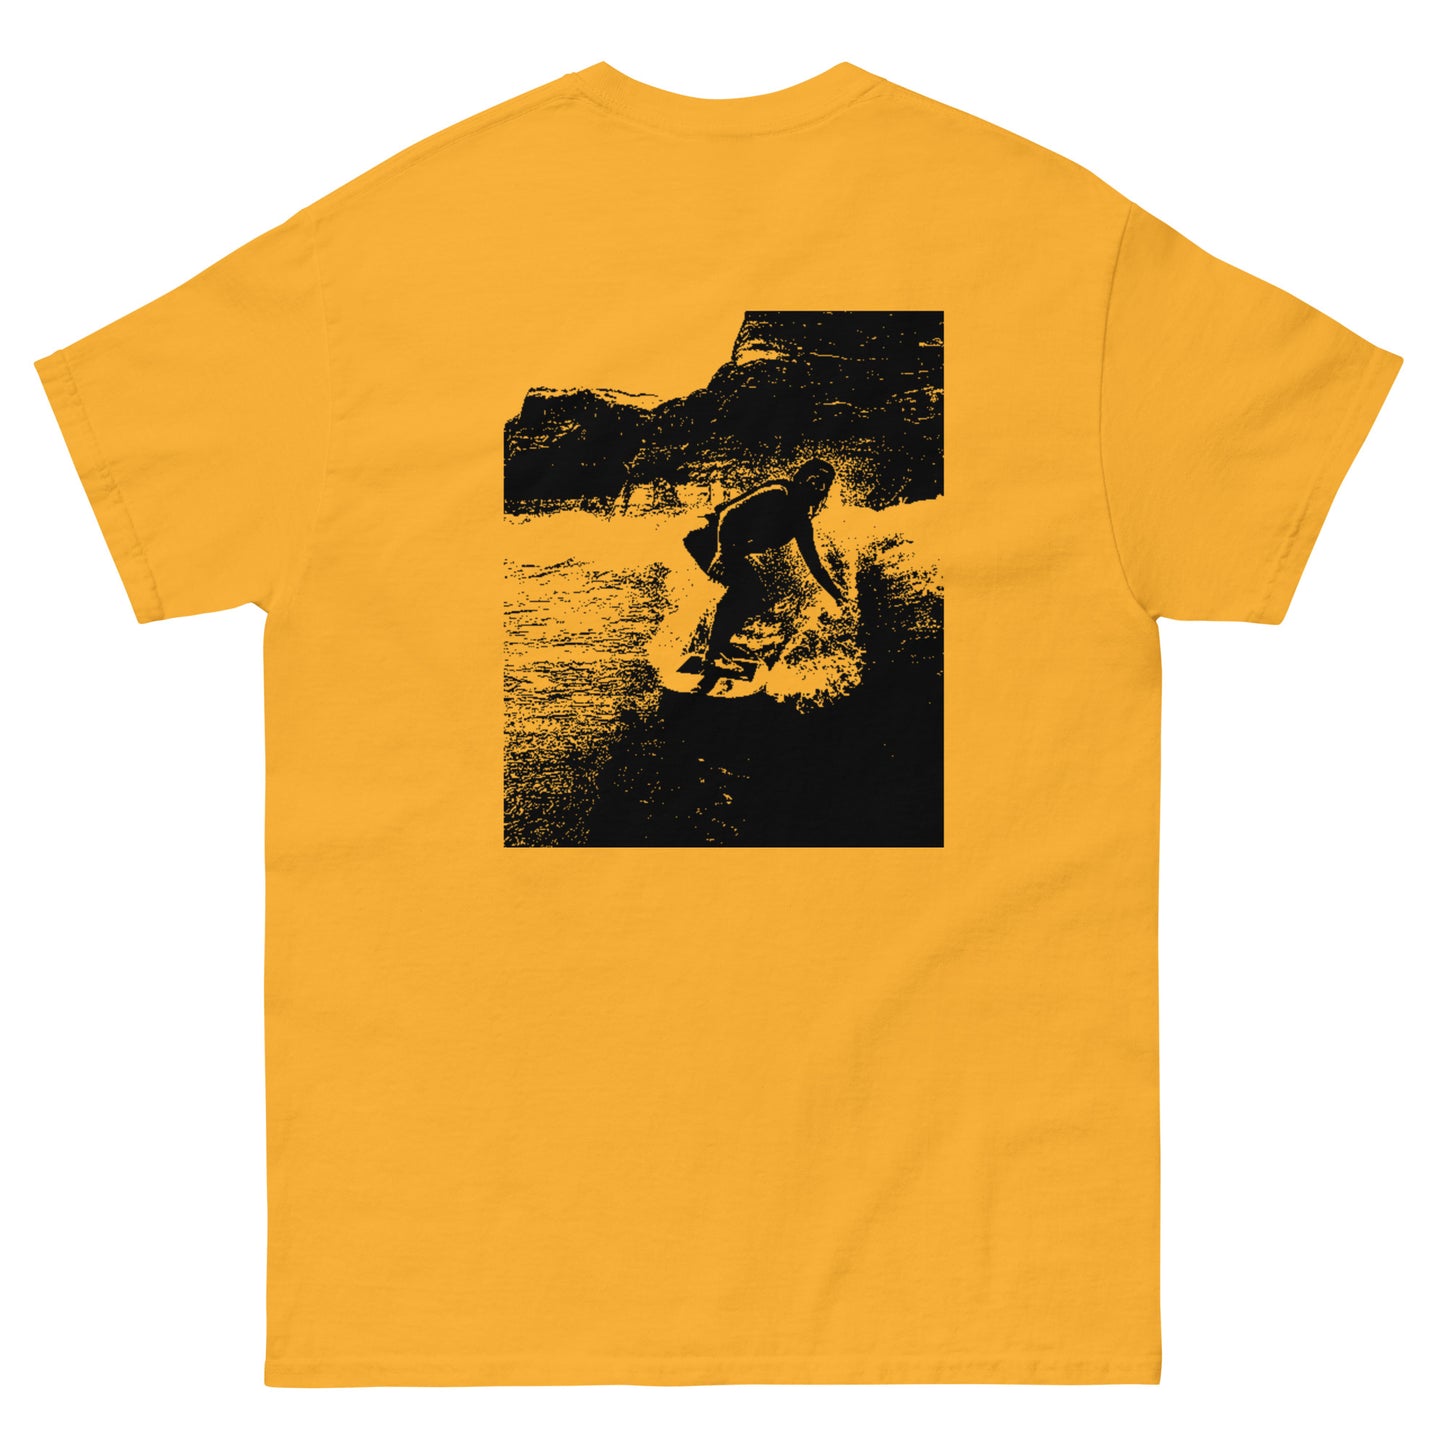 Silhouette Surf's Up Tee